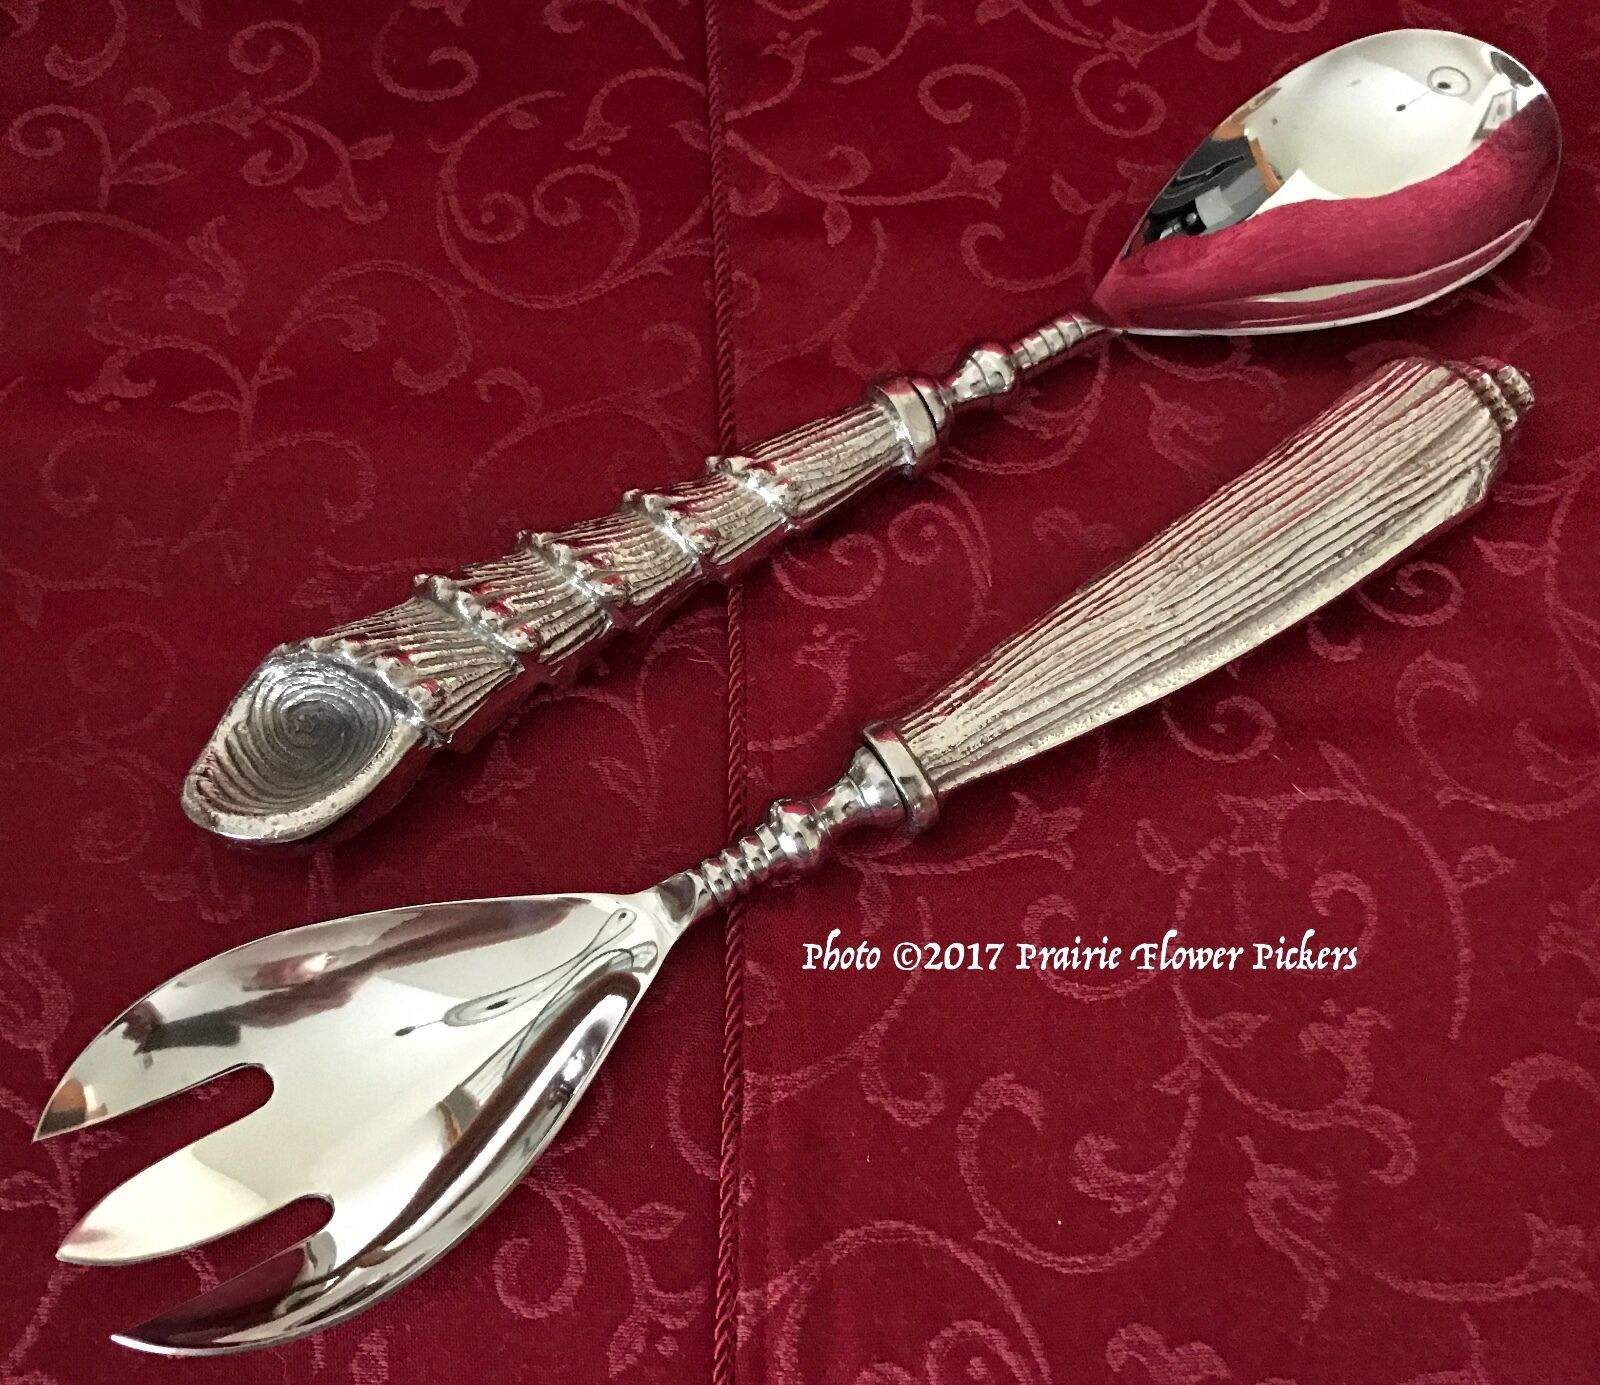  Julia Knight Shell 2-piece Salad Server Set - Retired - Great for beach house